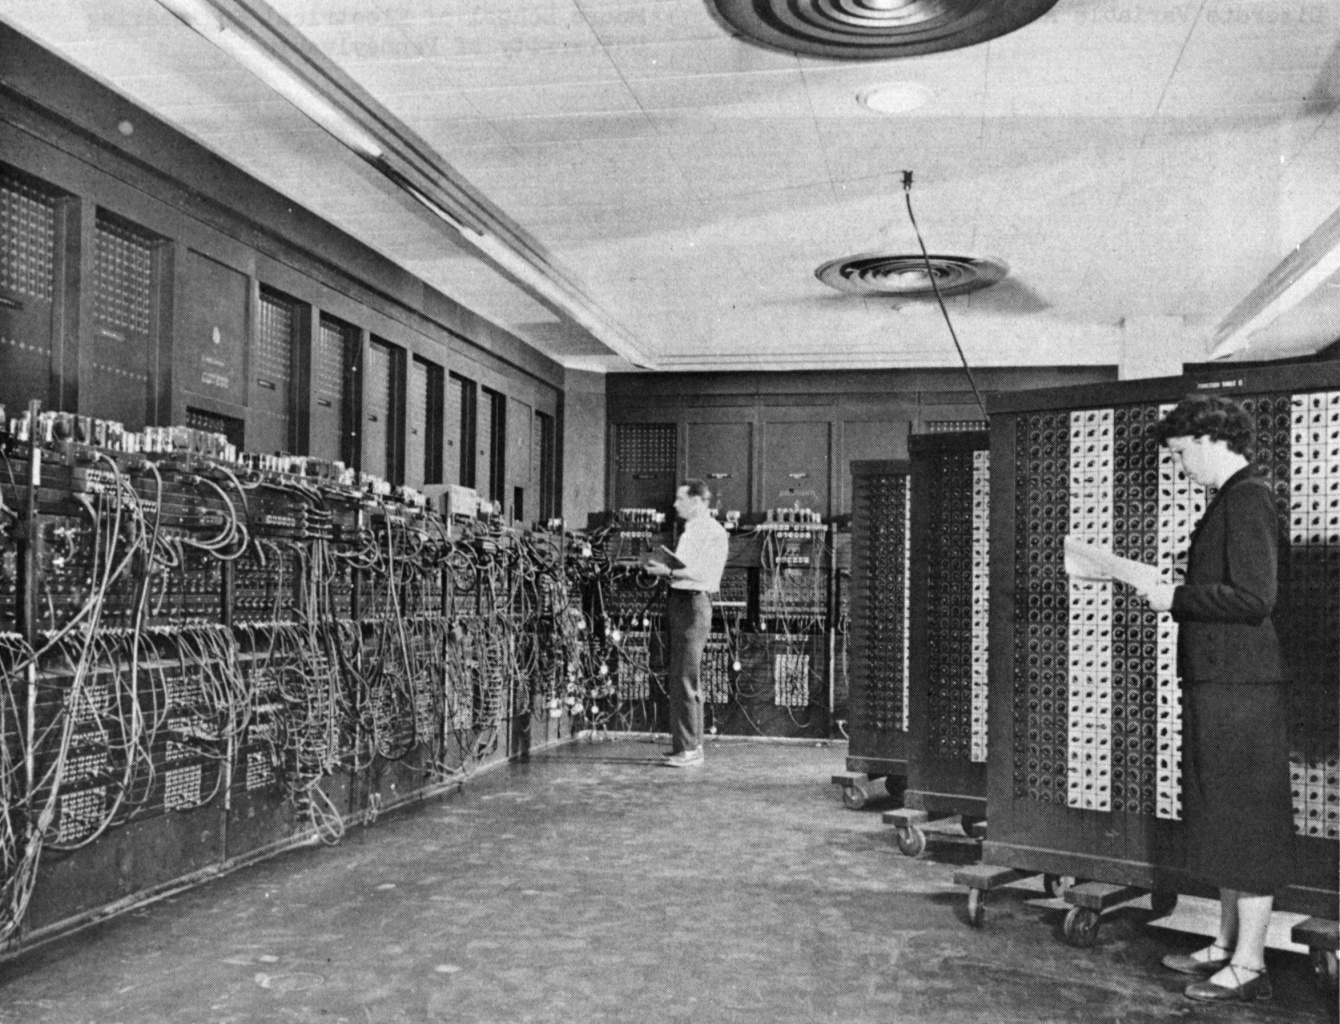 Glen Beck (background) and Betty Snyder (foreground) program ENIAC in BRL building 328. (U.S. Army photo)